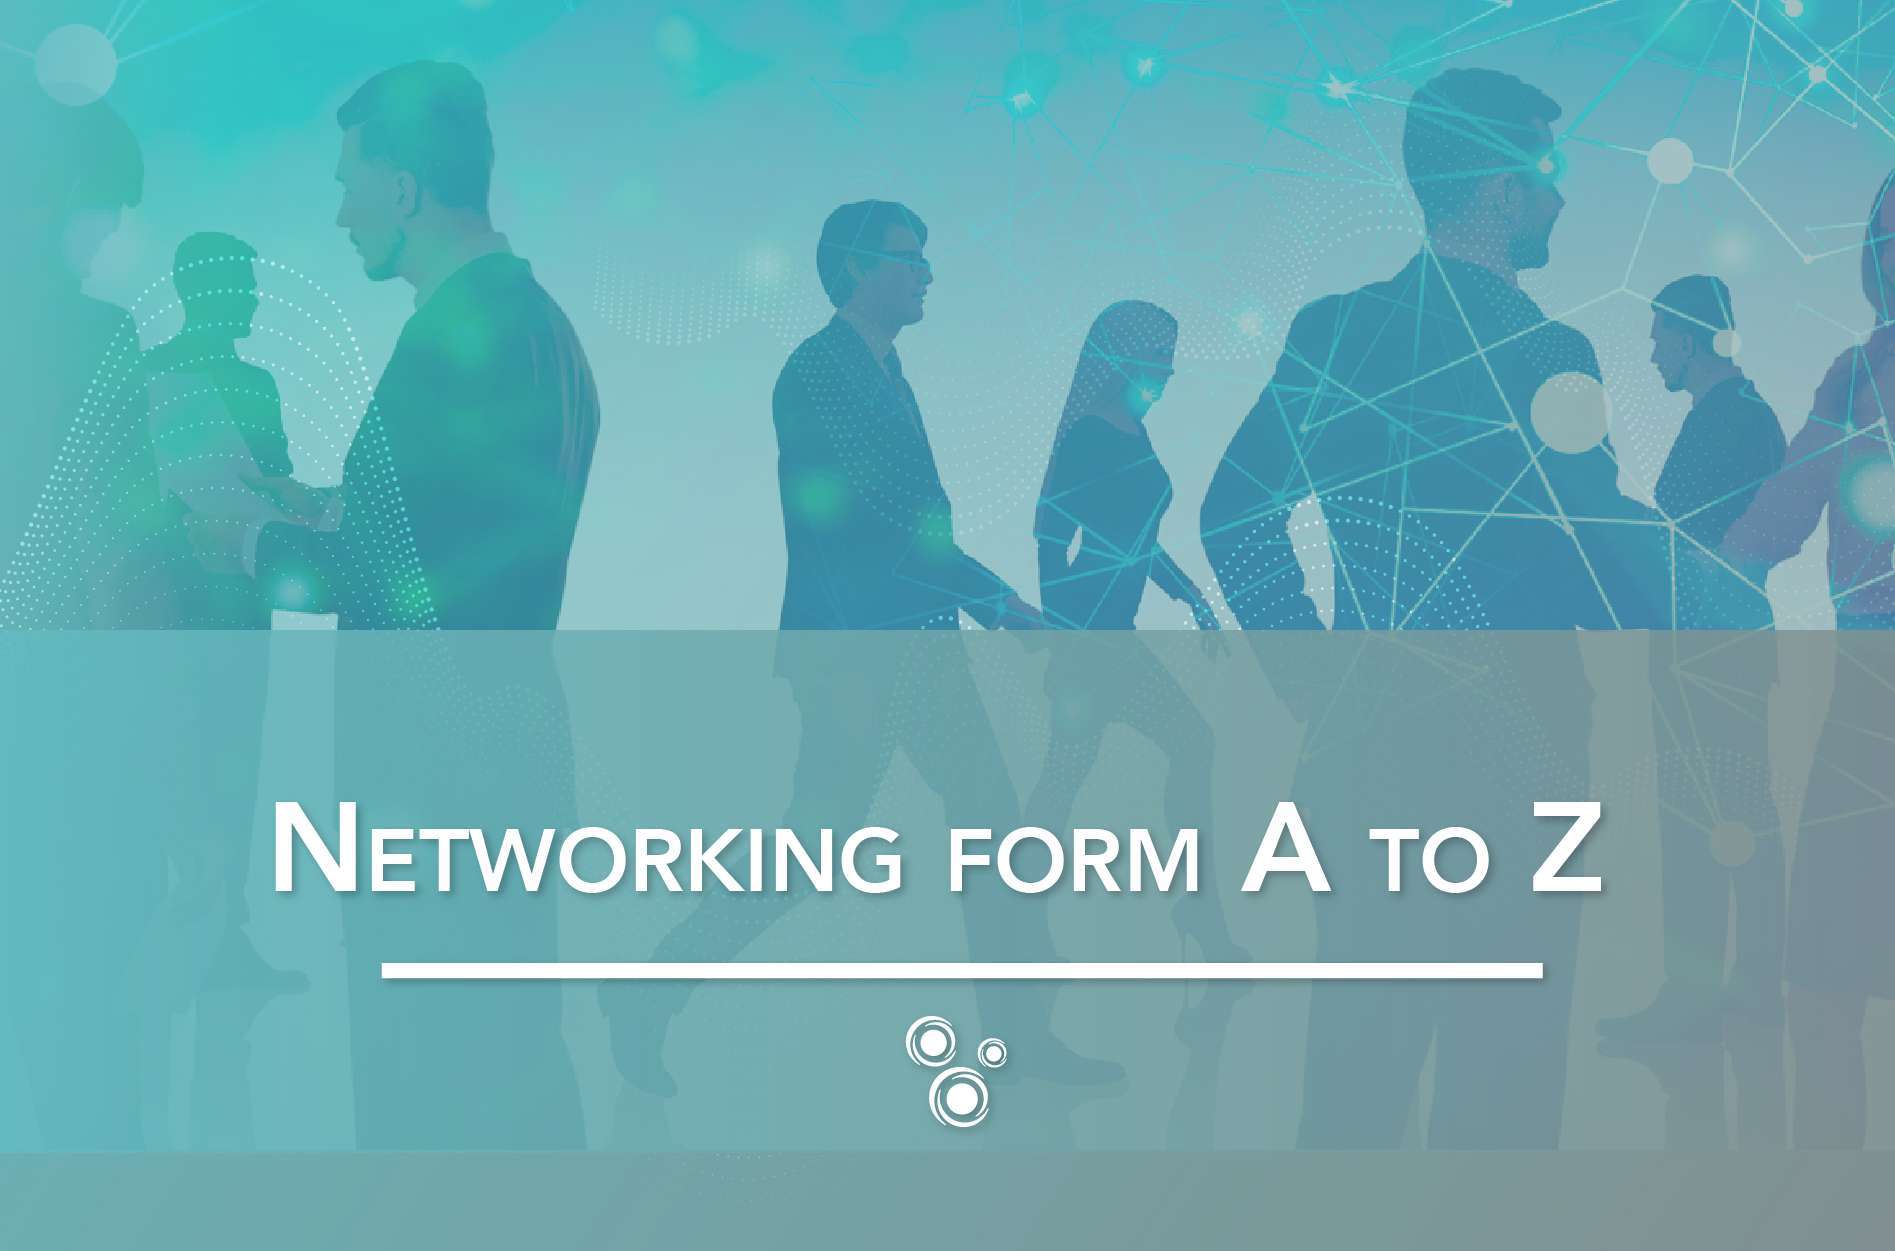 Networking form A to Z